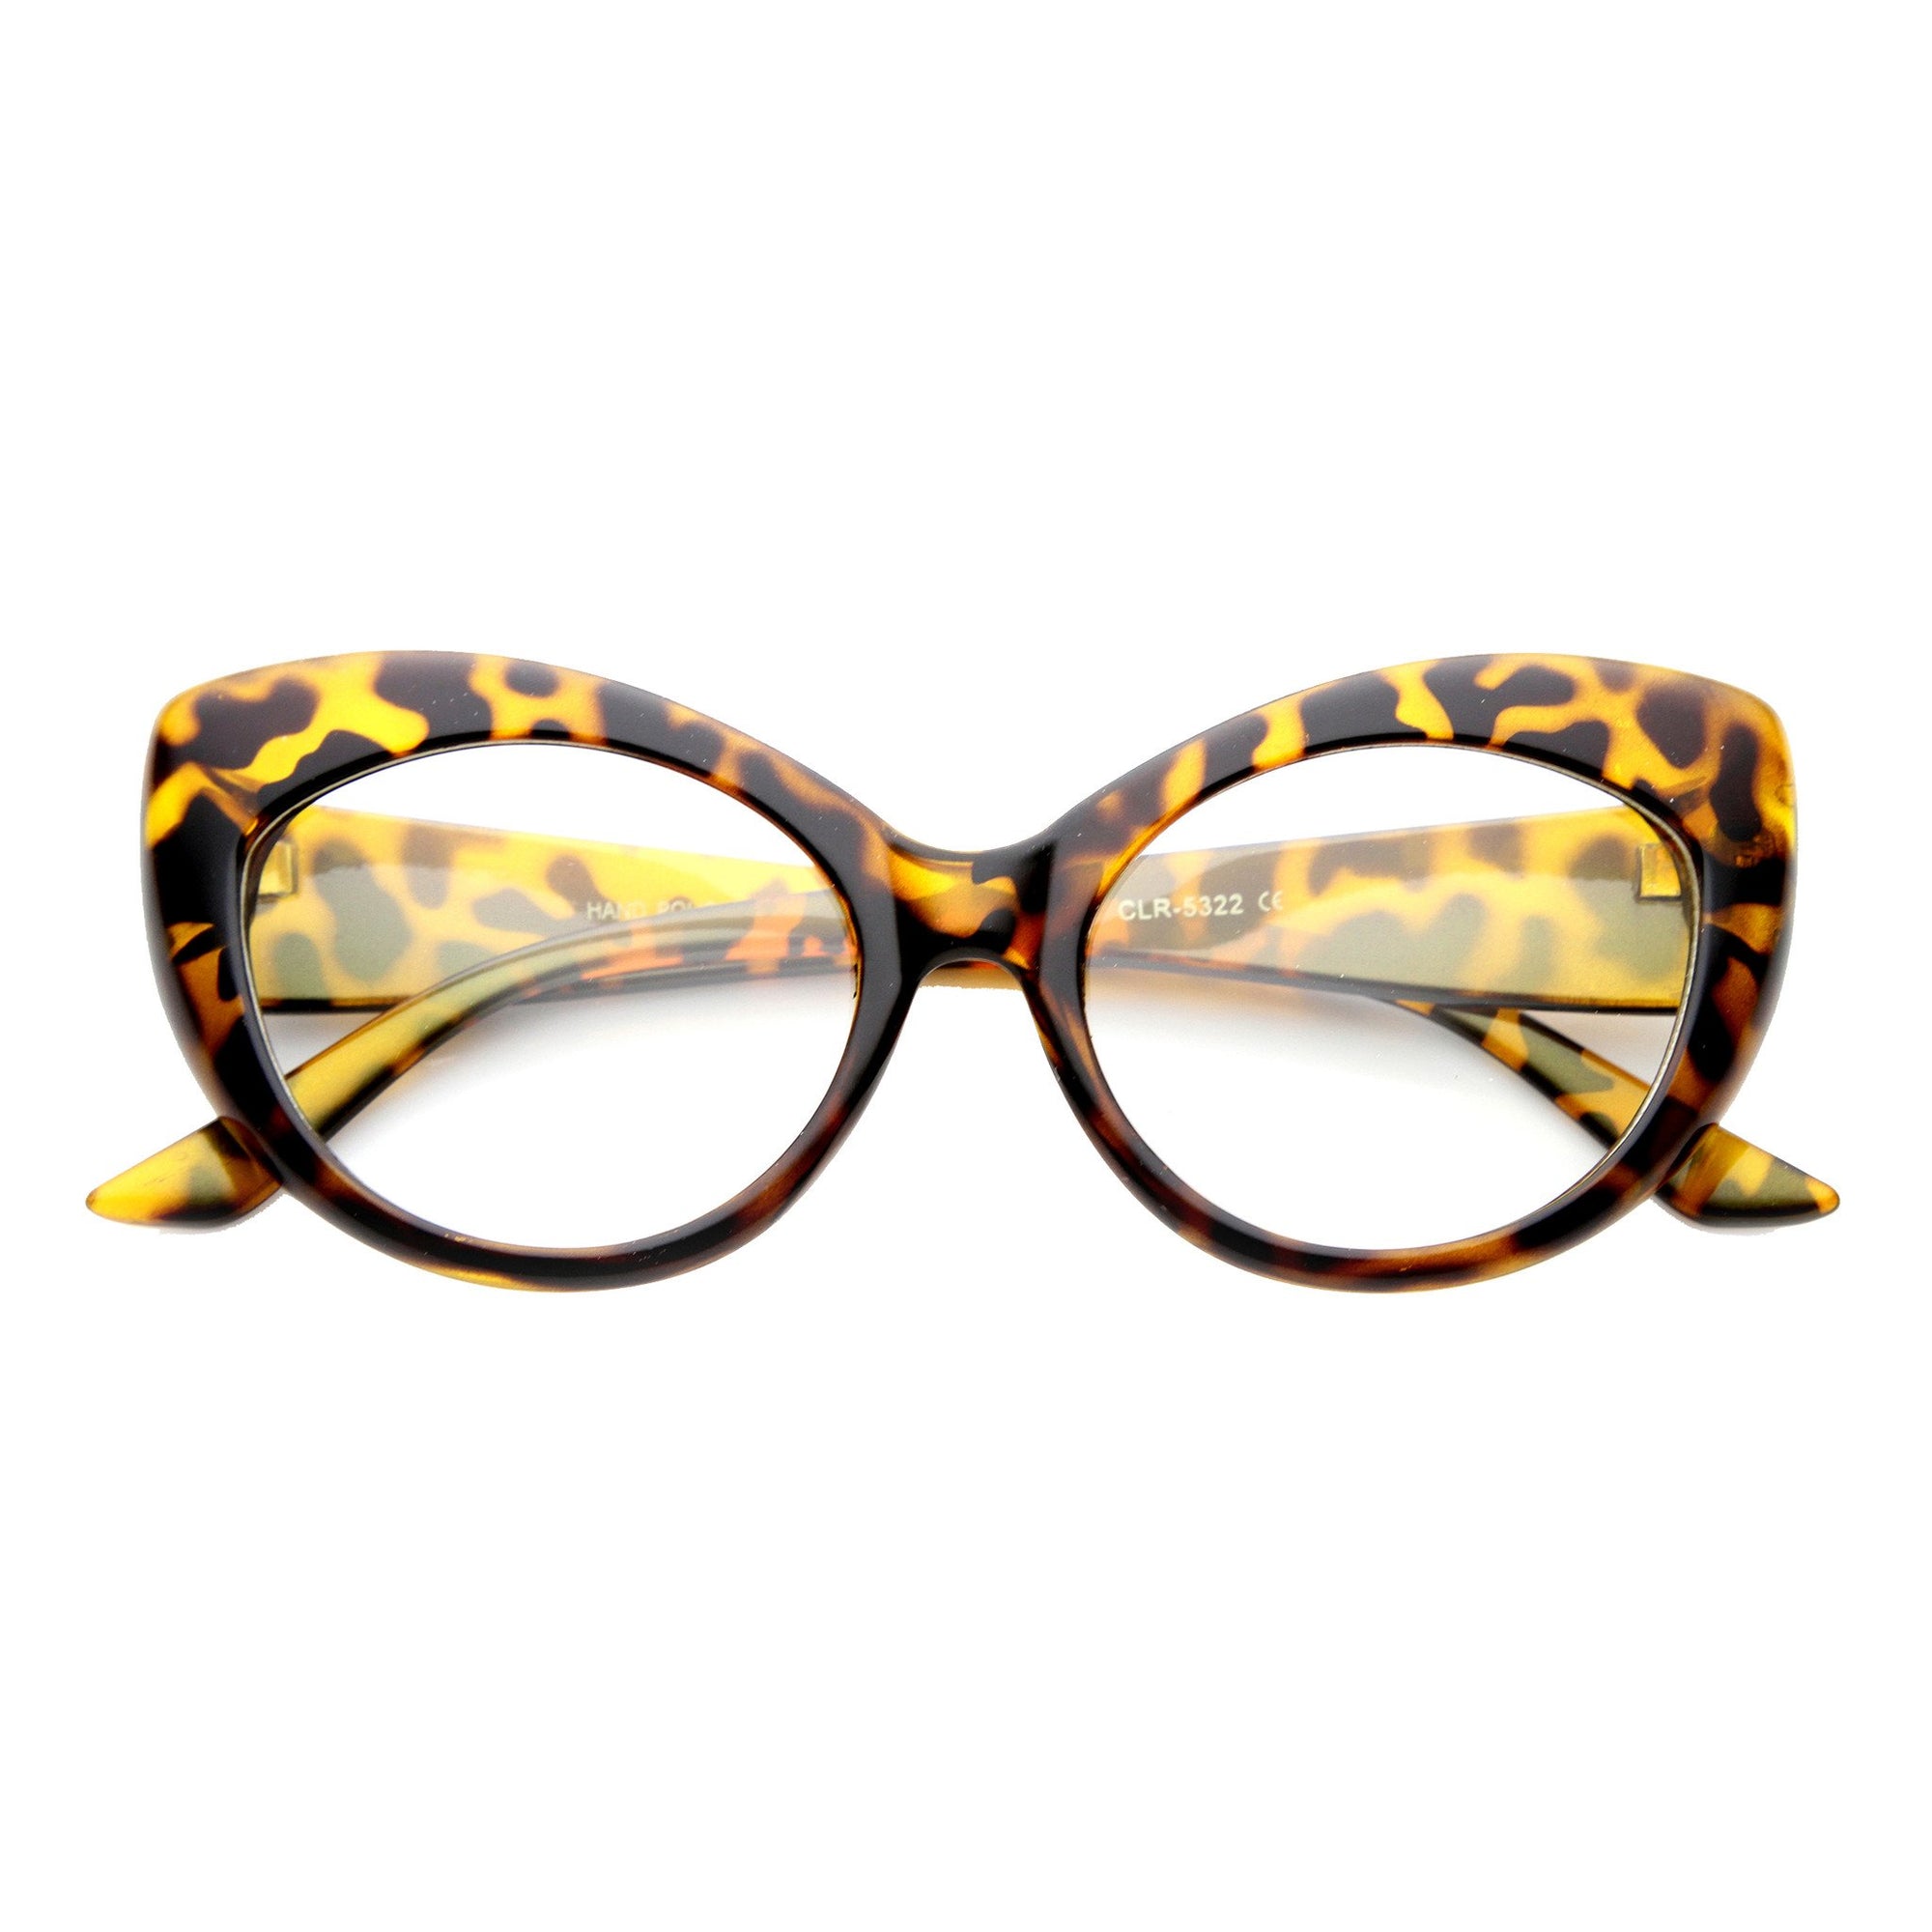 Retro 1950's Pointed Cat Eye Clear Lens Glasses - zeroUV